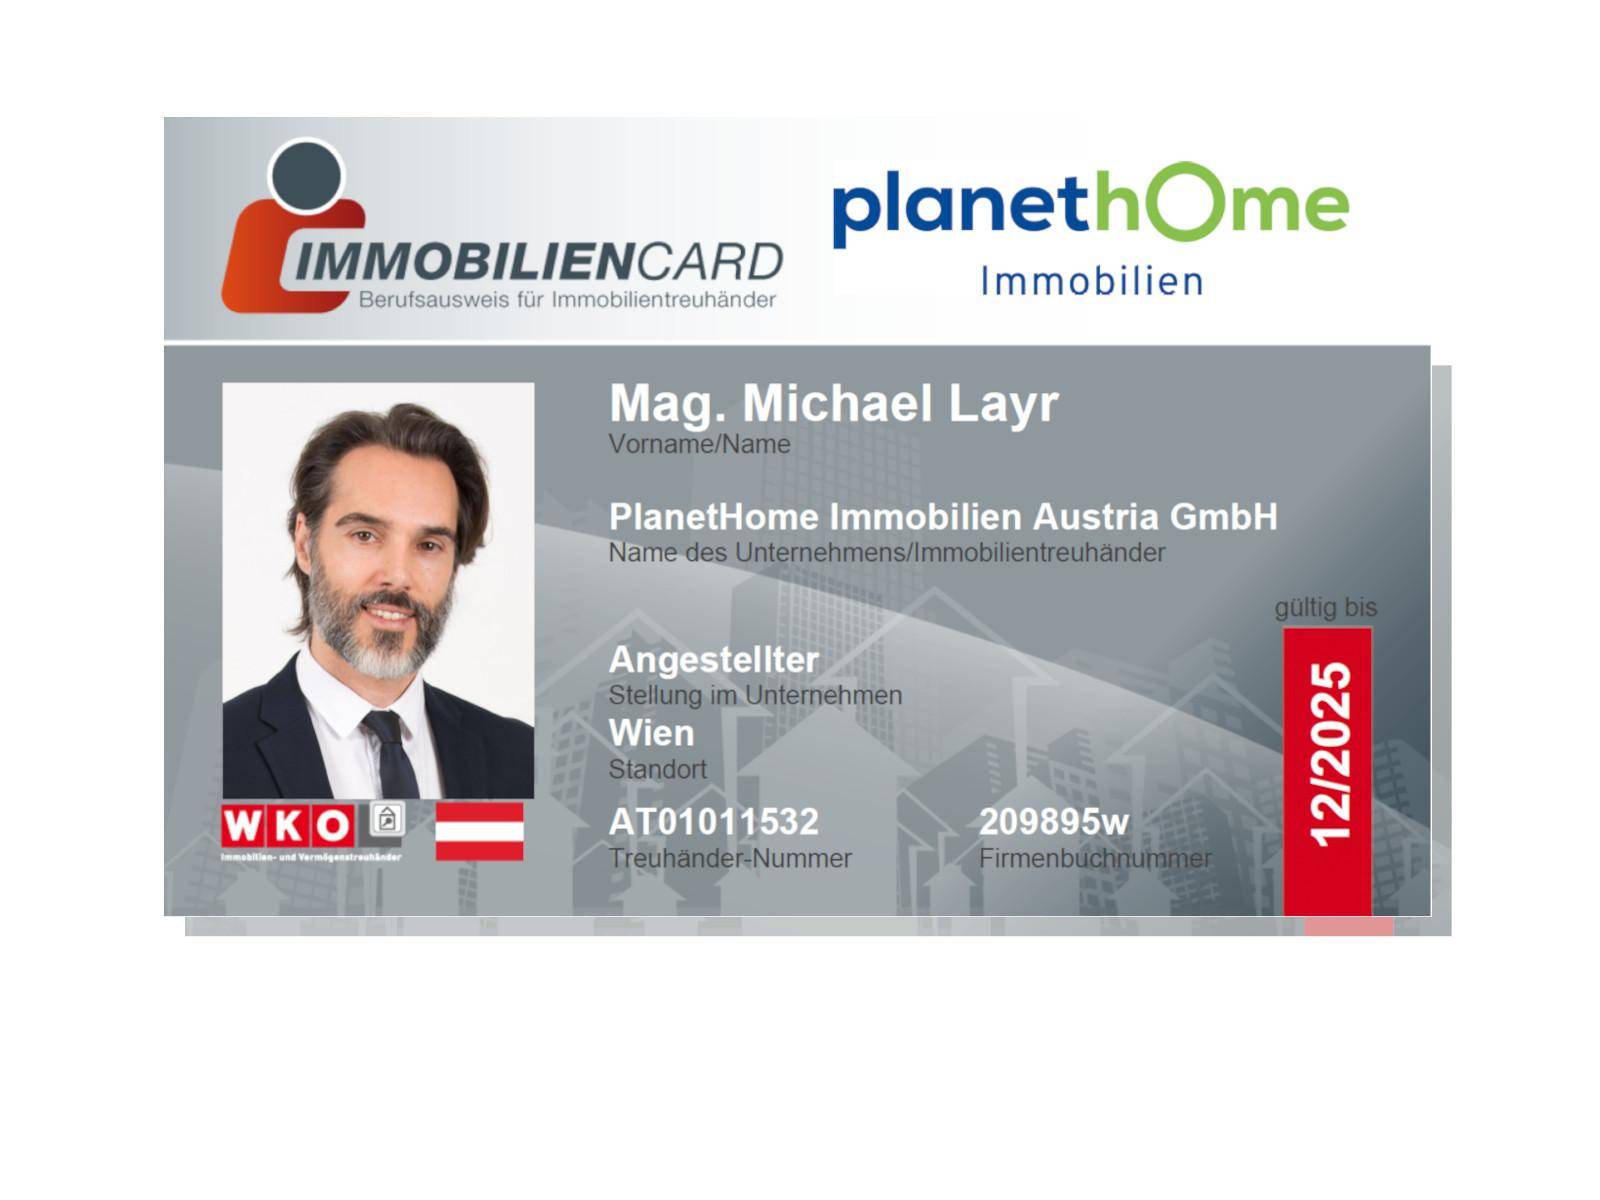 Immobiliencard